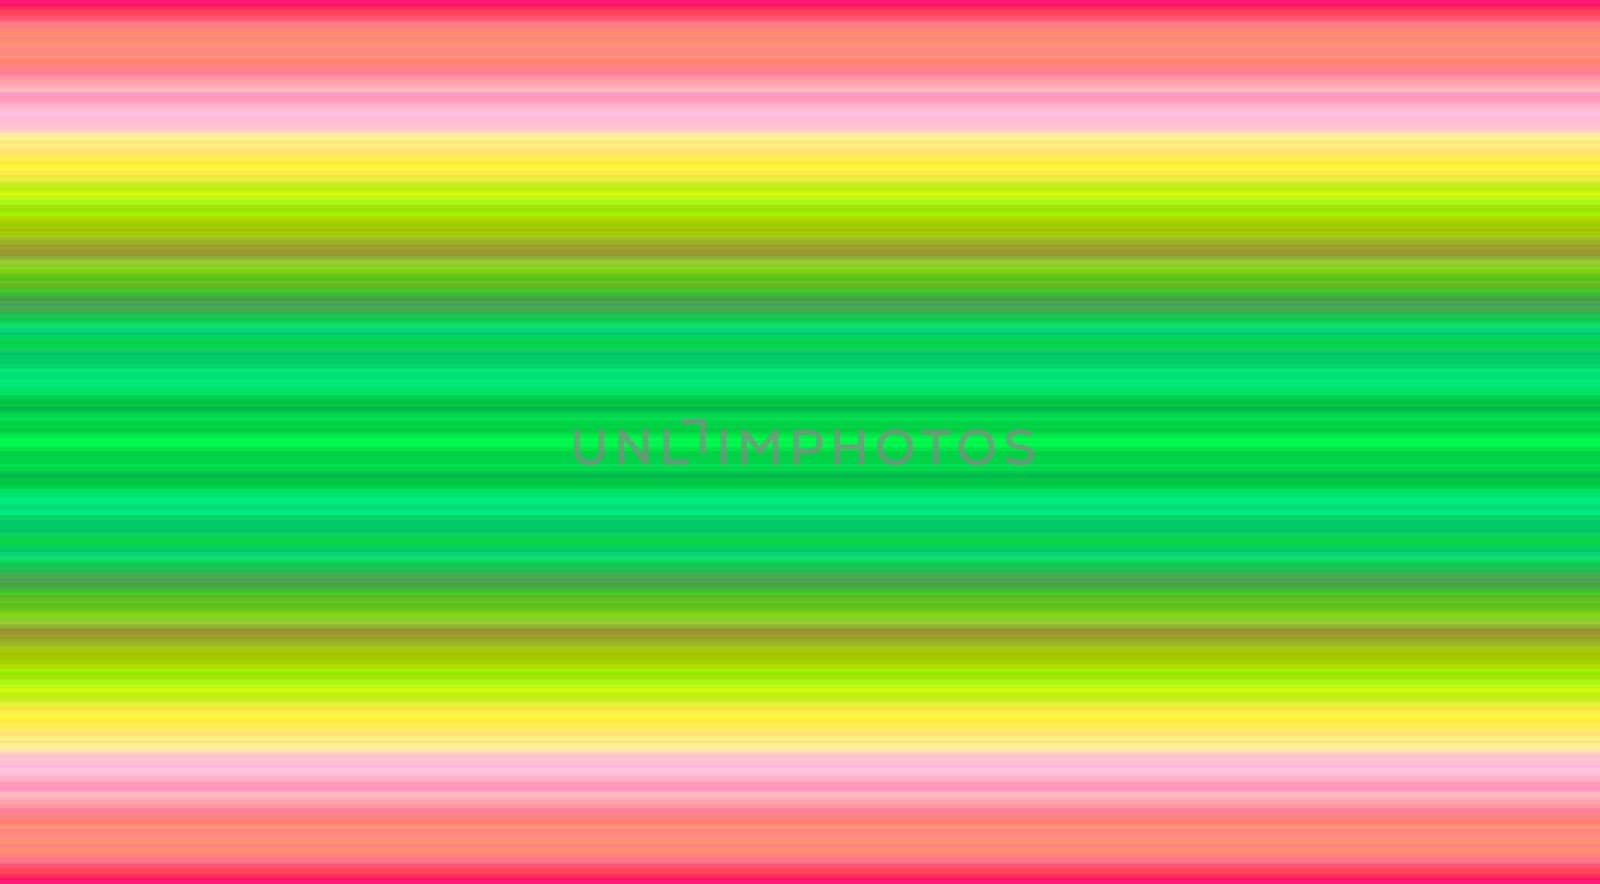 Digital abstract drawing of light green and pink transverse straight lines by ozornina